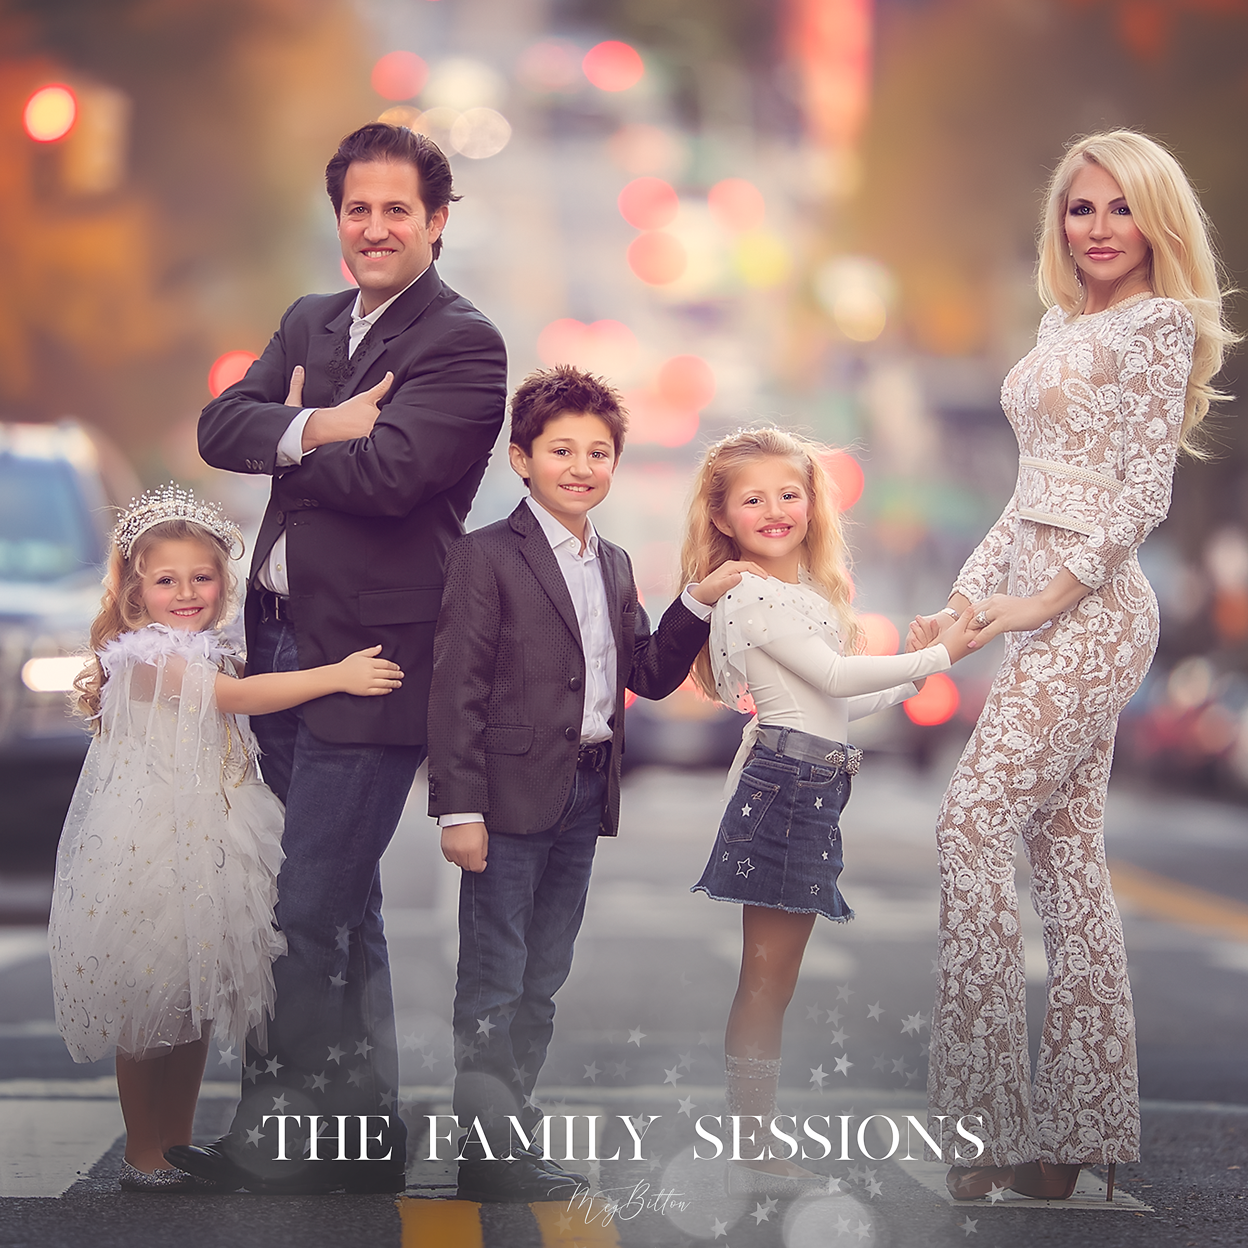 The Family Sessions - 2021 - Meg Bitton Productions